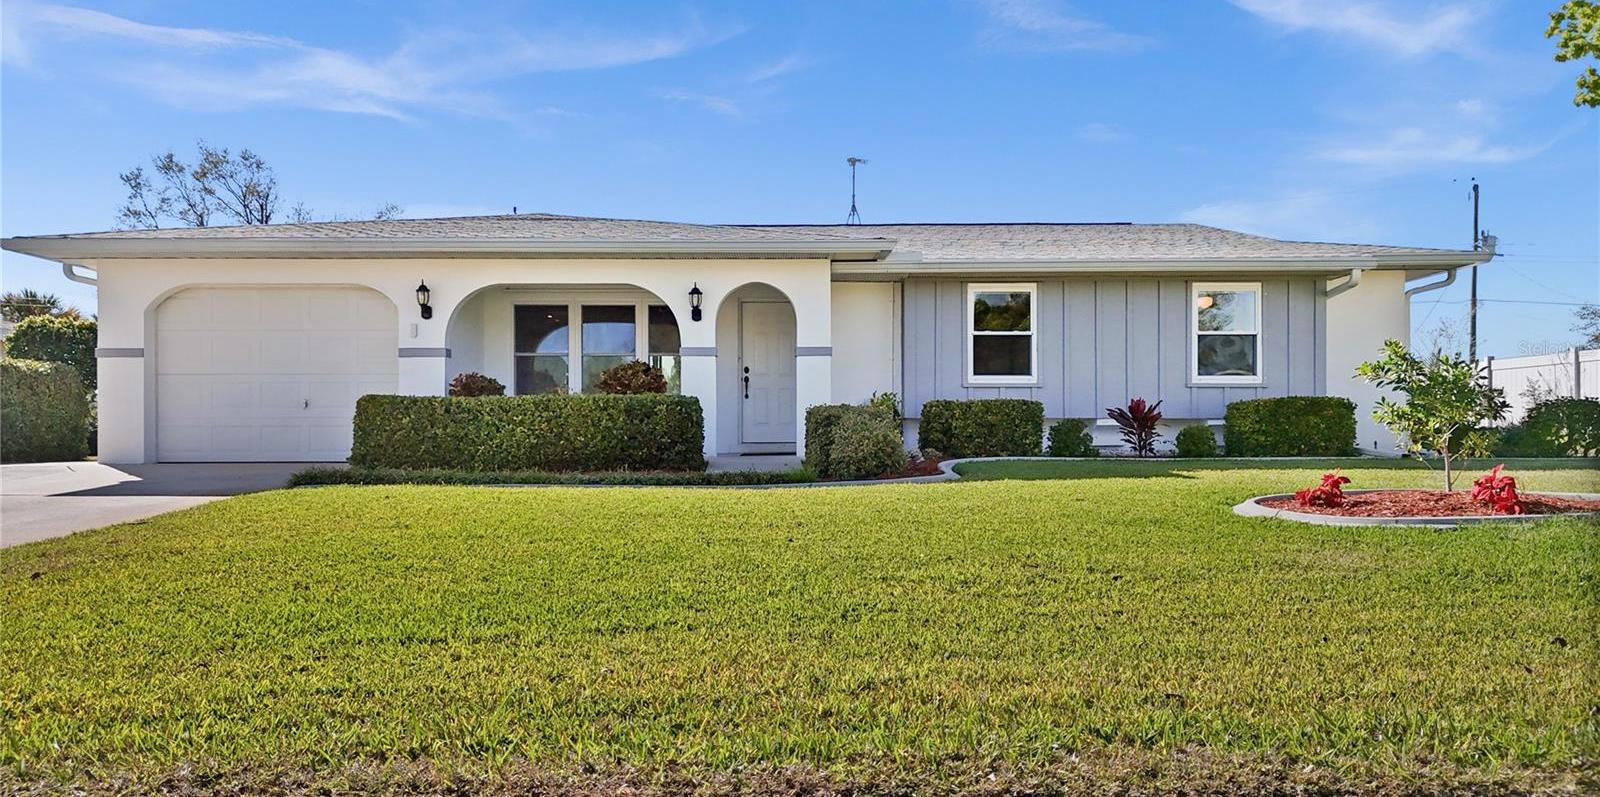 Photo one of 318 Timbruce Nw Ln Port Charlotte FL 33952 | MLS C7488461